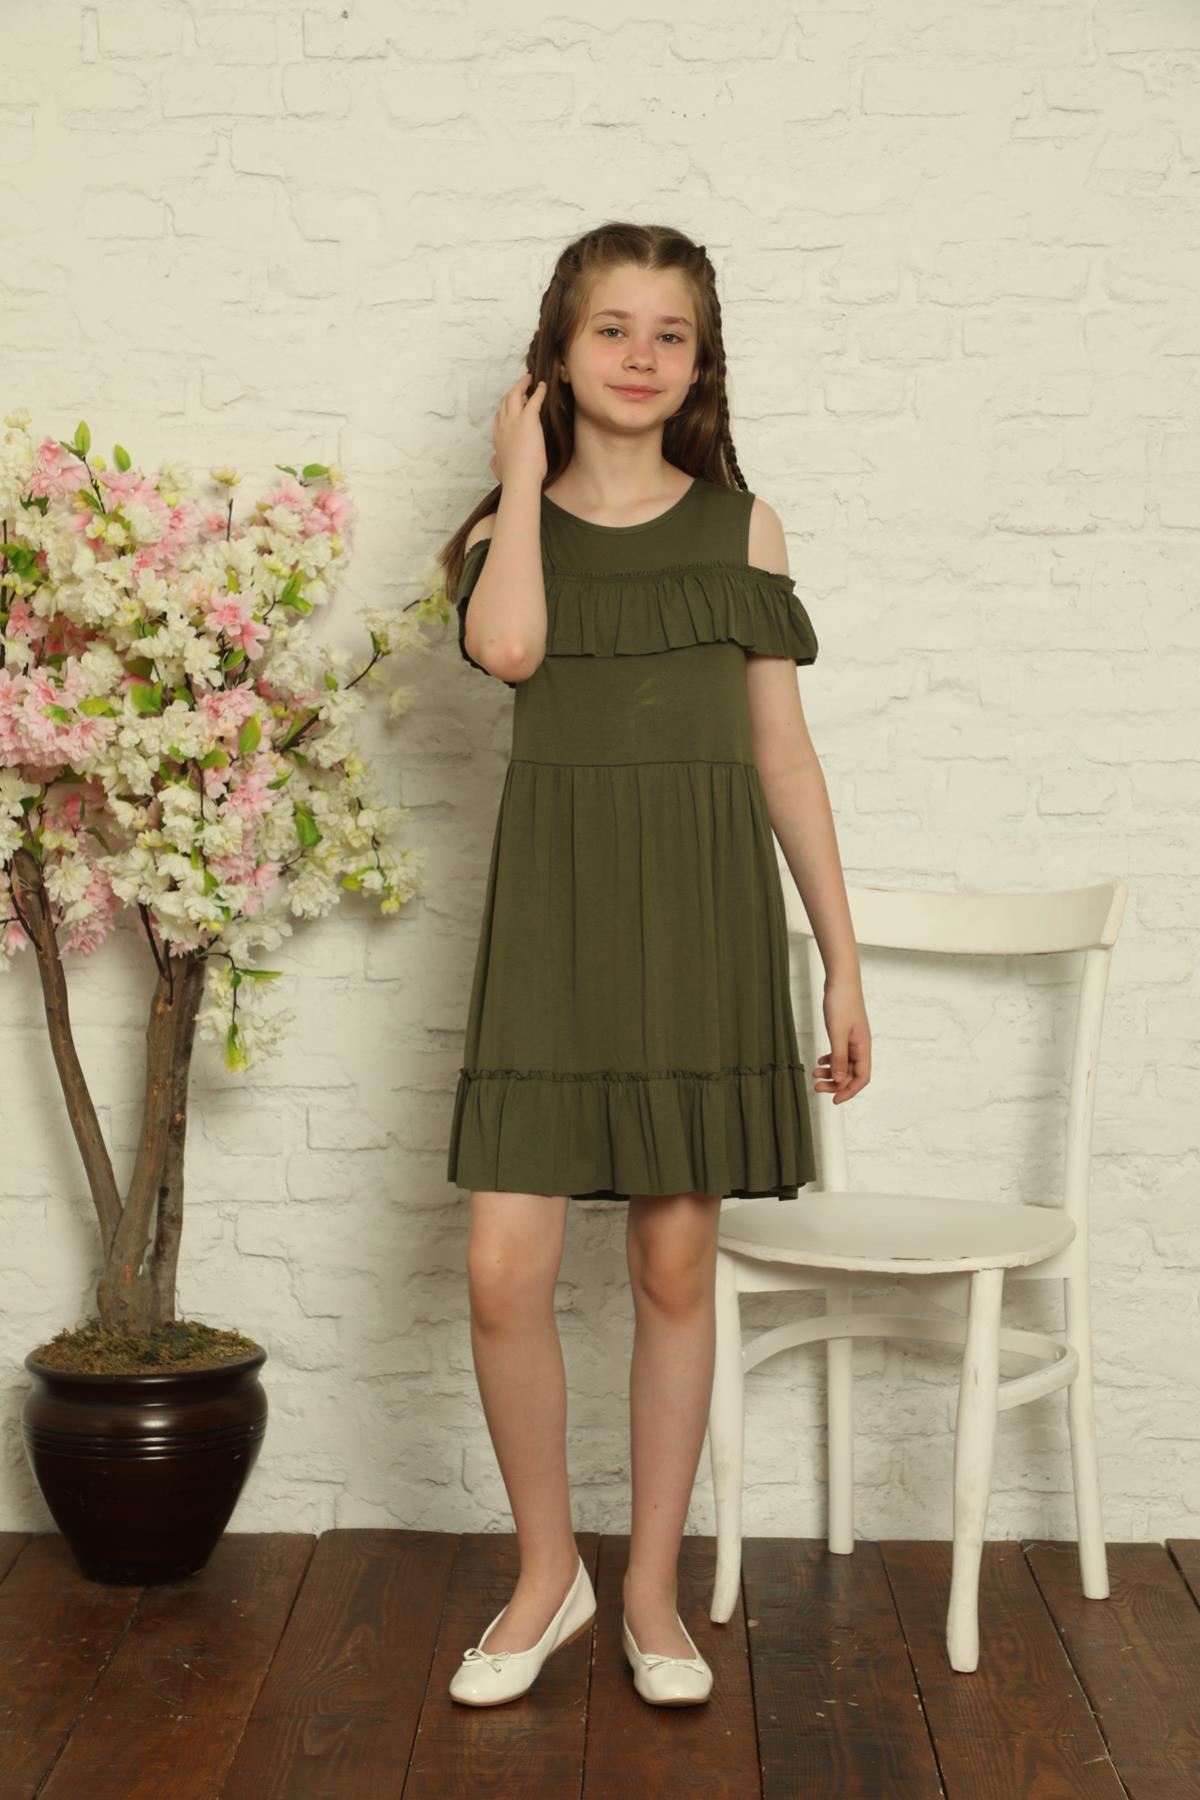 Girl's Dress with Shoulder Window and Ruffle Chest